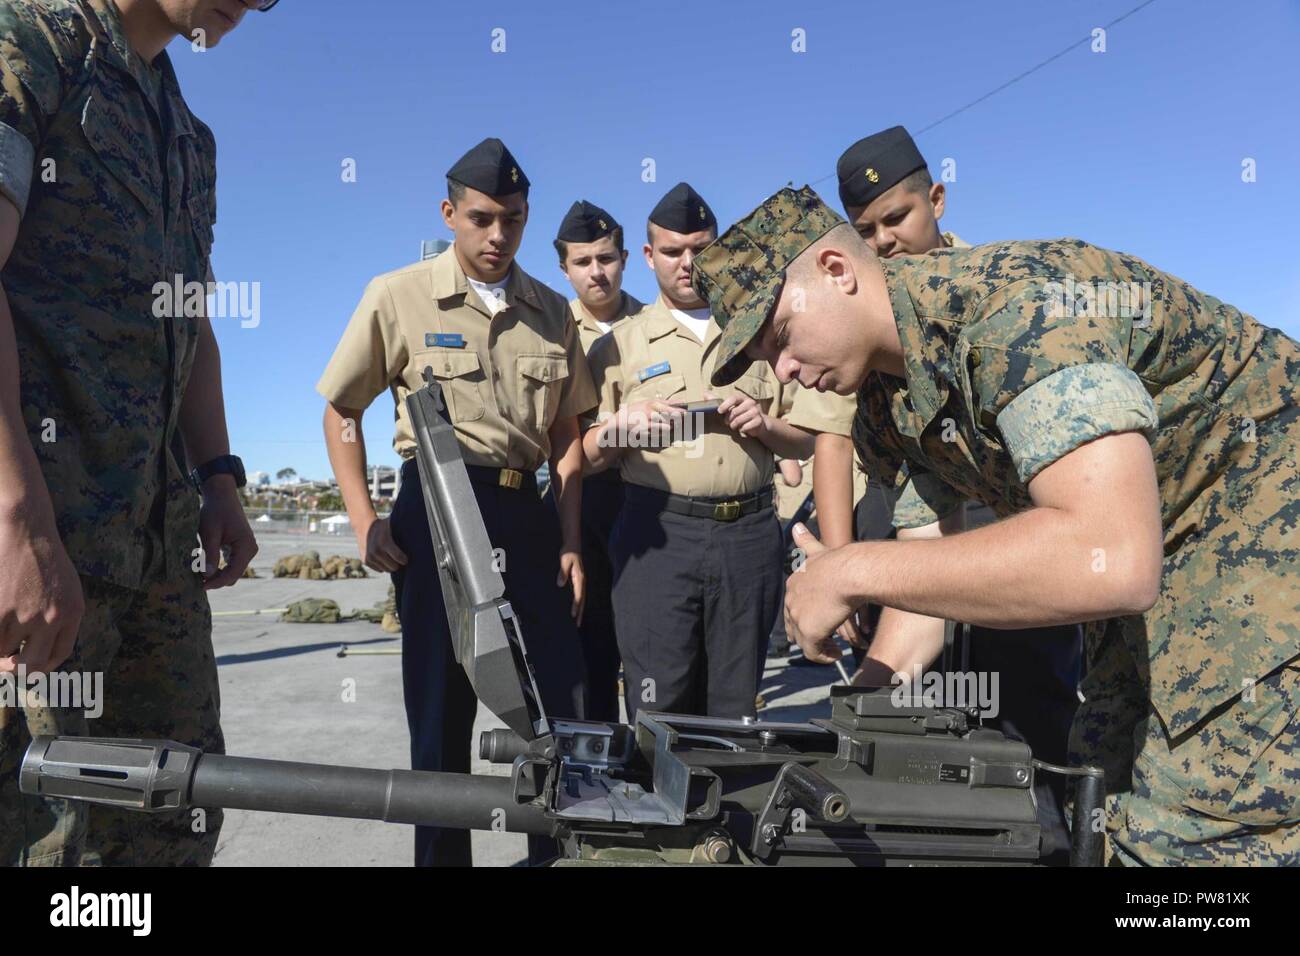 SAN FRANCISCO (Oct. 2, 2017) Lance Cpl. Nathan Colter, assigned to the 2nd Battalion, 5th Marines, demonstrates the operation of an MK19 grenade launcher to students of the Turlock High School Navy Junior Reserve Officers Training Corps during Fleet Week San Francisco. Fleet week provides an opportunity for the American public to meet their Navy, Marine Corps, and Coast Guard team and to experience America’s sea services. Fleet Week San Francisco will highlight naval personnel, equipment, technology, and capabilities, with an emphasis on humanitarian assistance and disaster response. Stock Photo